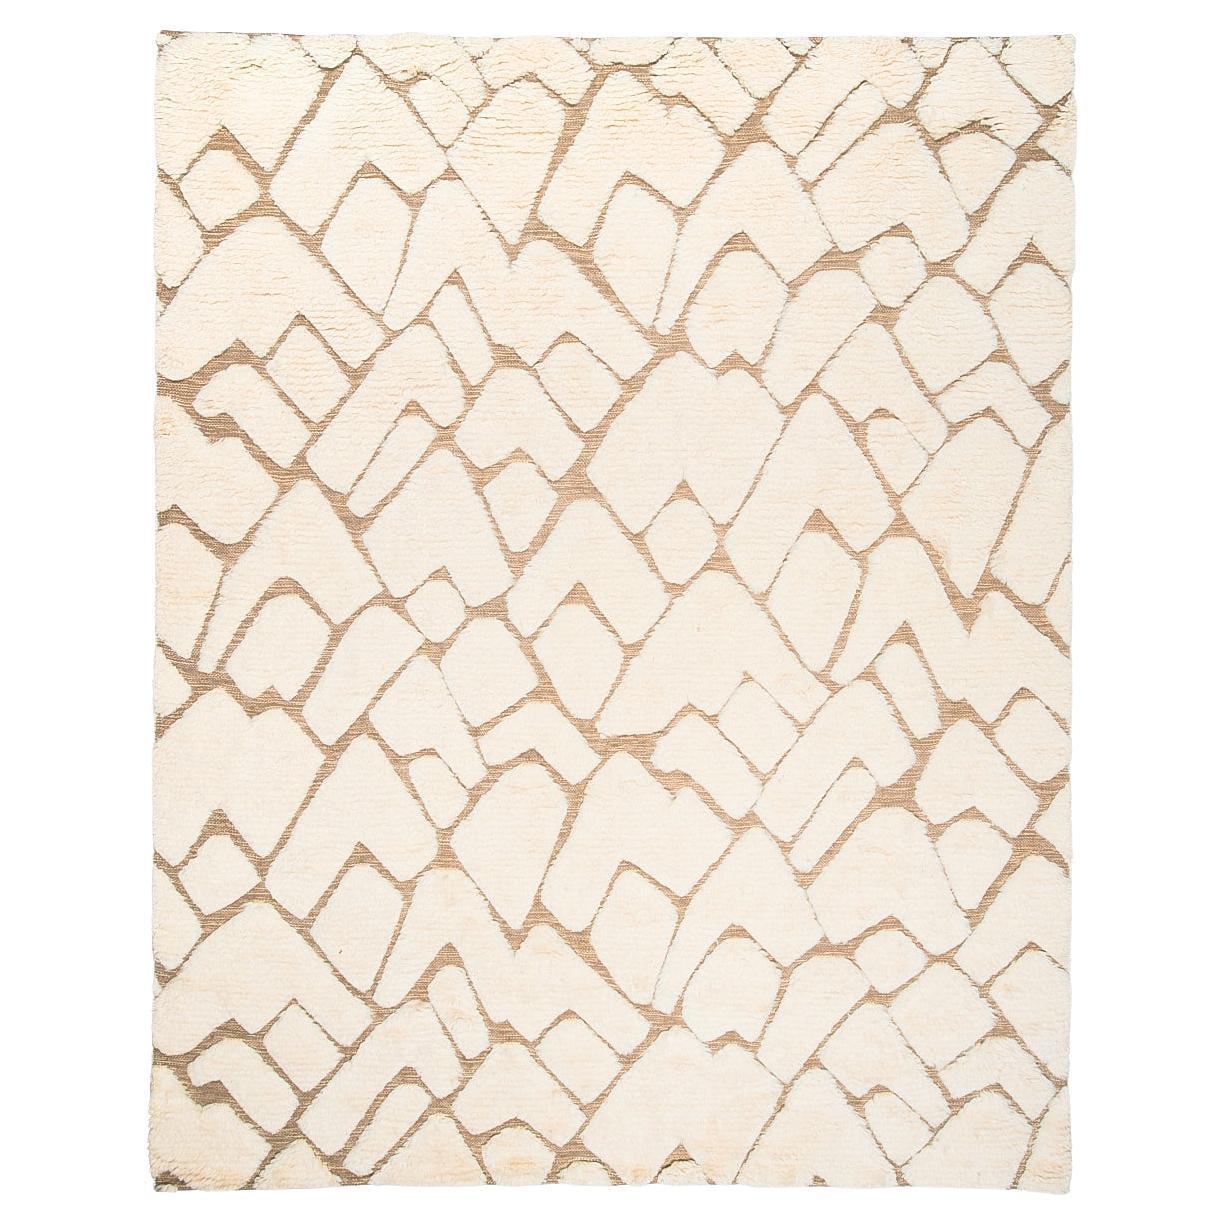 Schumacher Zimba 10' x 14' Rug In Ivory & Sand For Sale